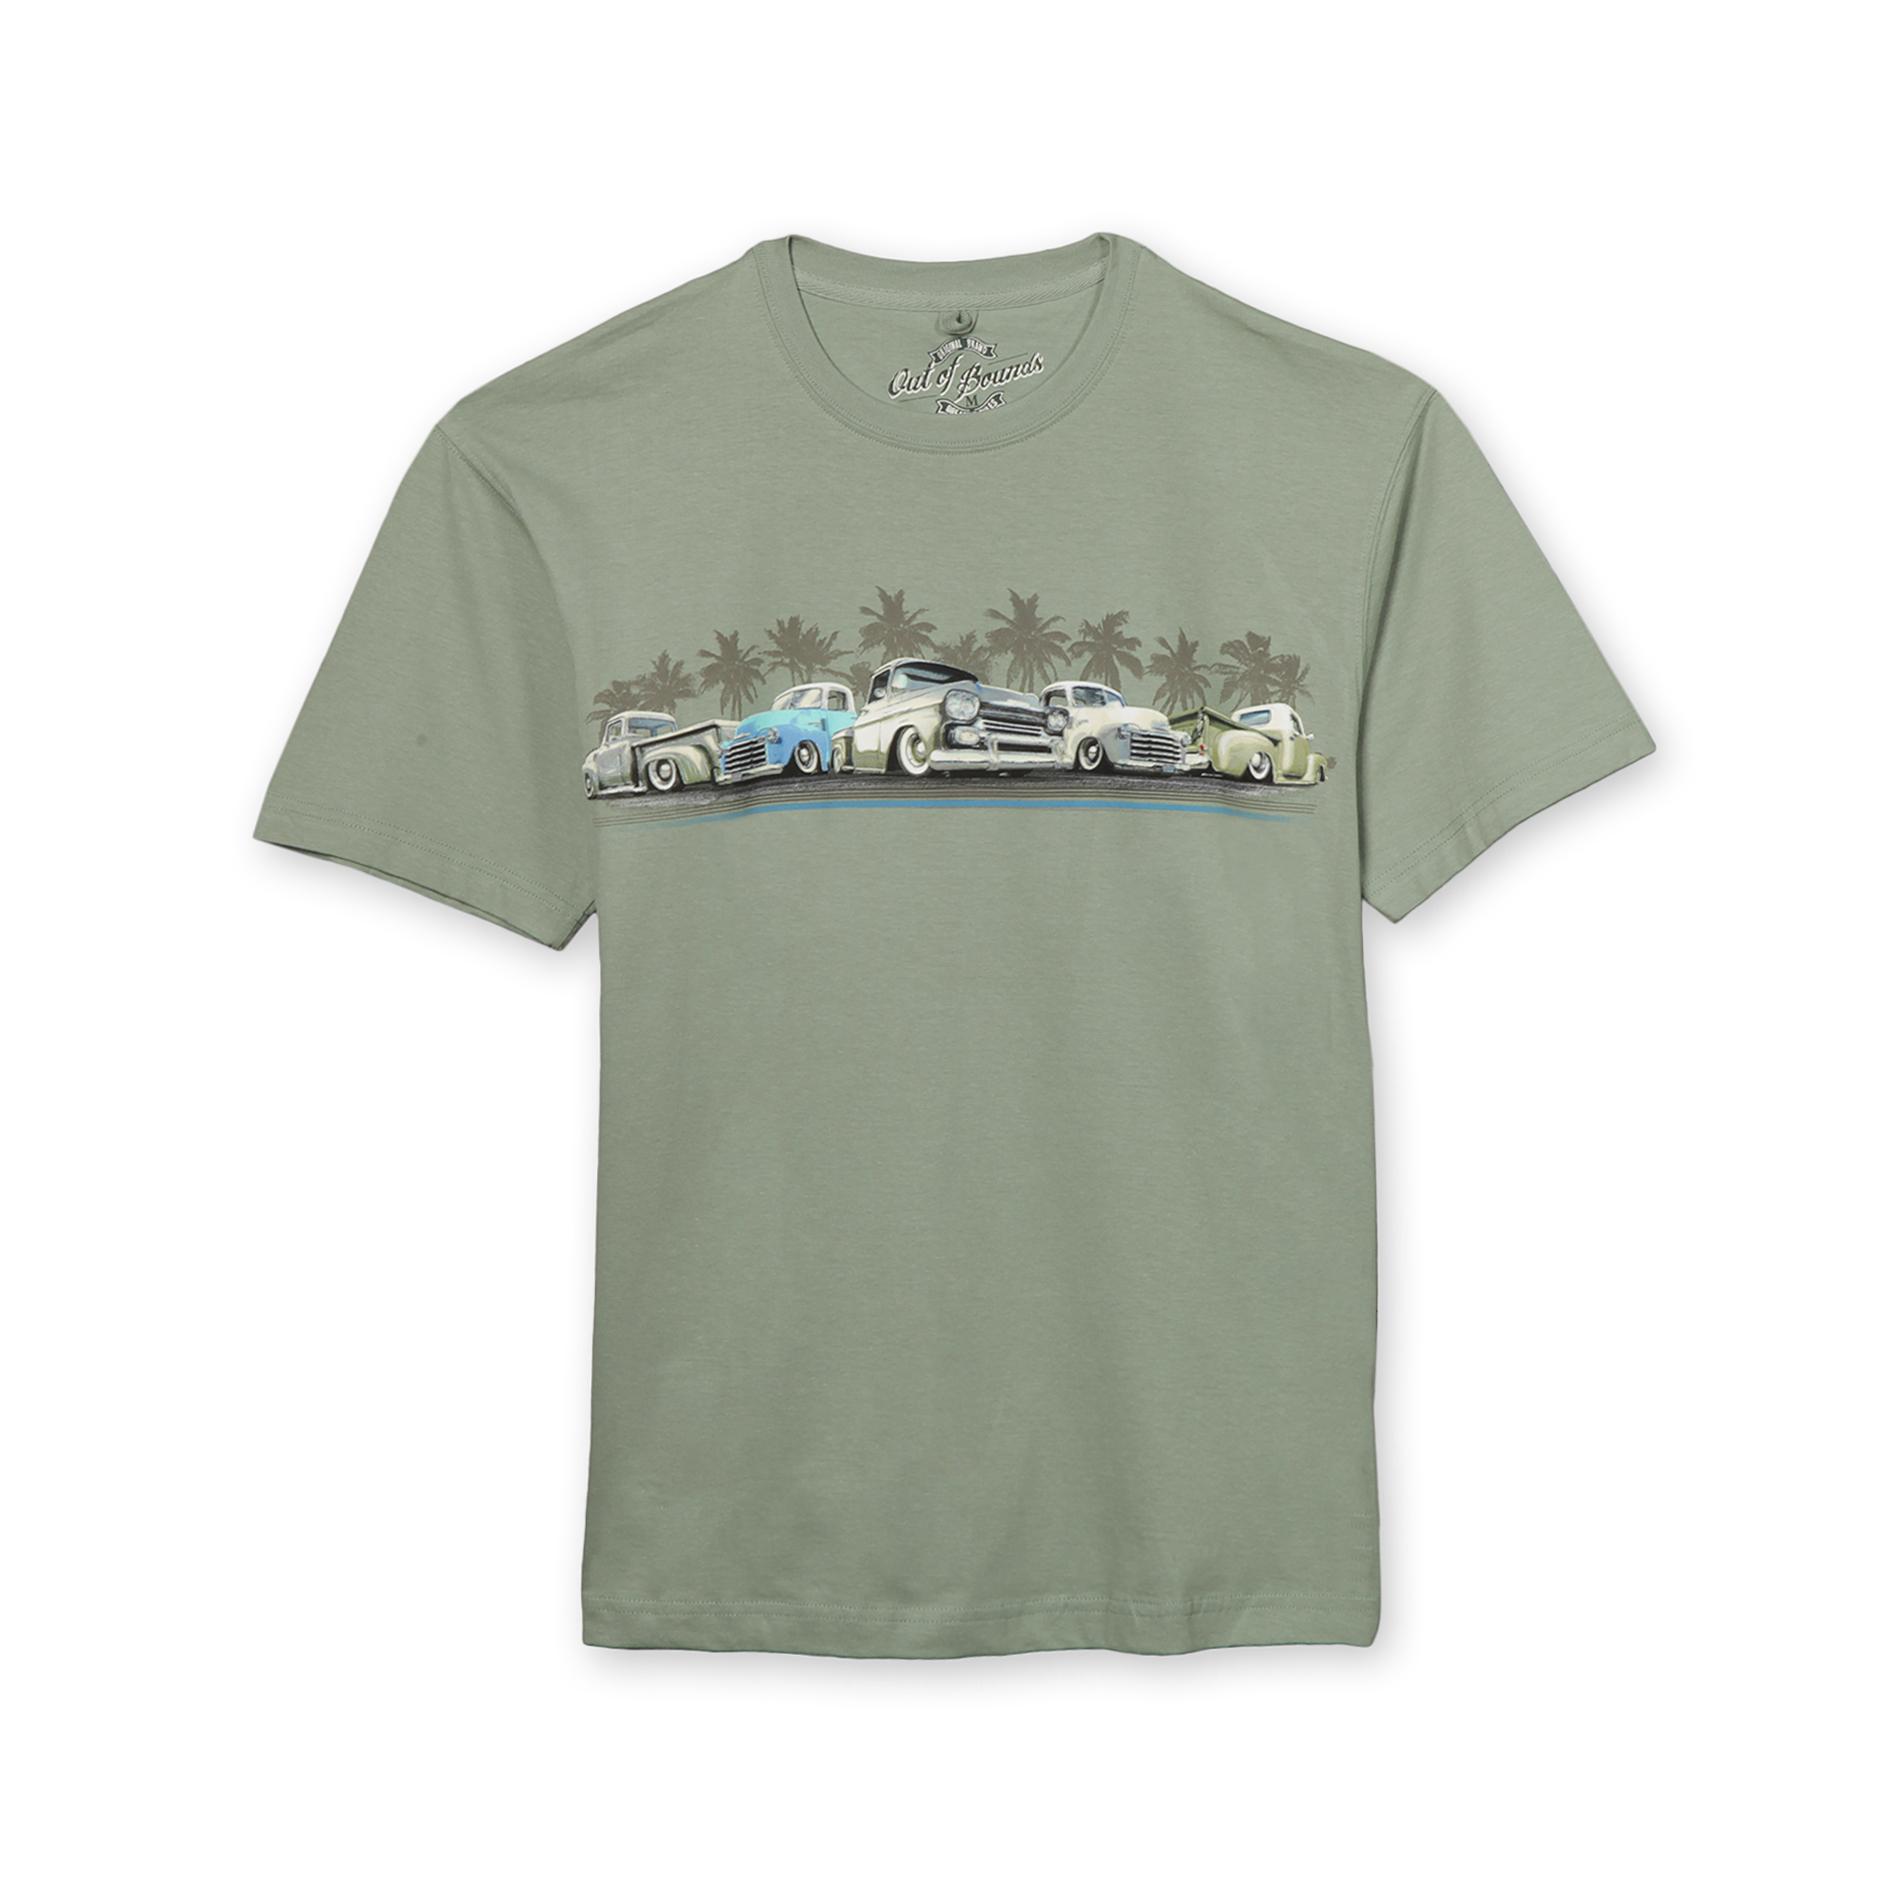 Out of Bounds Men's Graphic T-Shirt - Classic Trucks